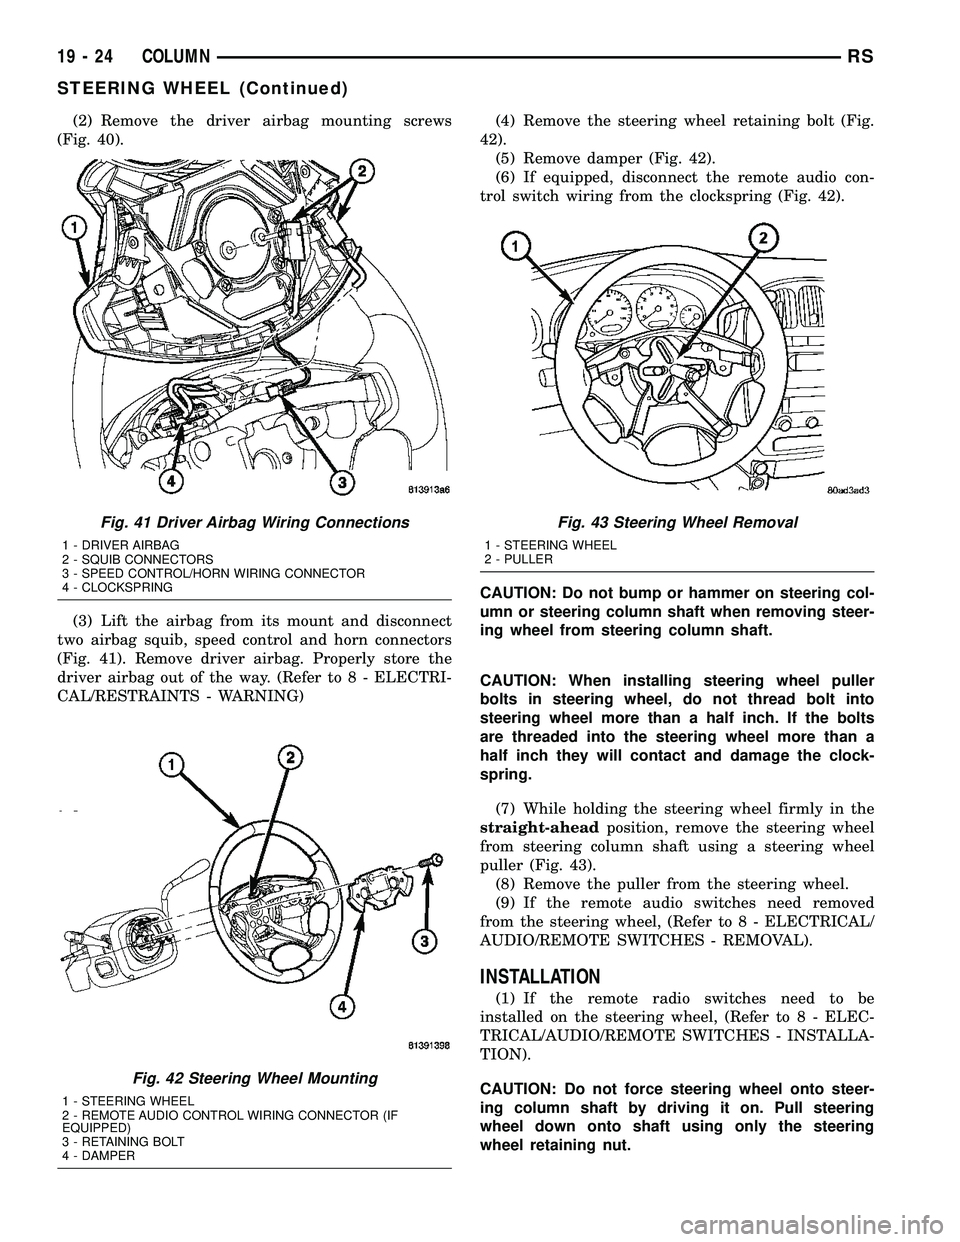 CHRYSLER CARAVAN 2005 Manual PDF (2) Remove the driver airbag mounting screws
(Fig. 40).
(3) Lift the airbag from its mount and disconnect
two airbag squib, speed control and horn connectors
(Fig. 41). Remove driver airbag. Properly 